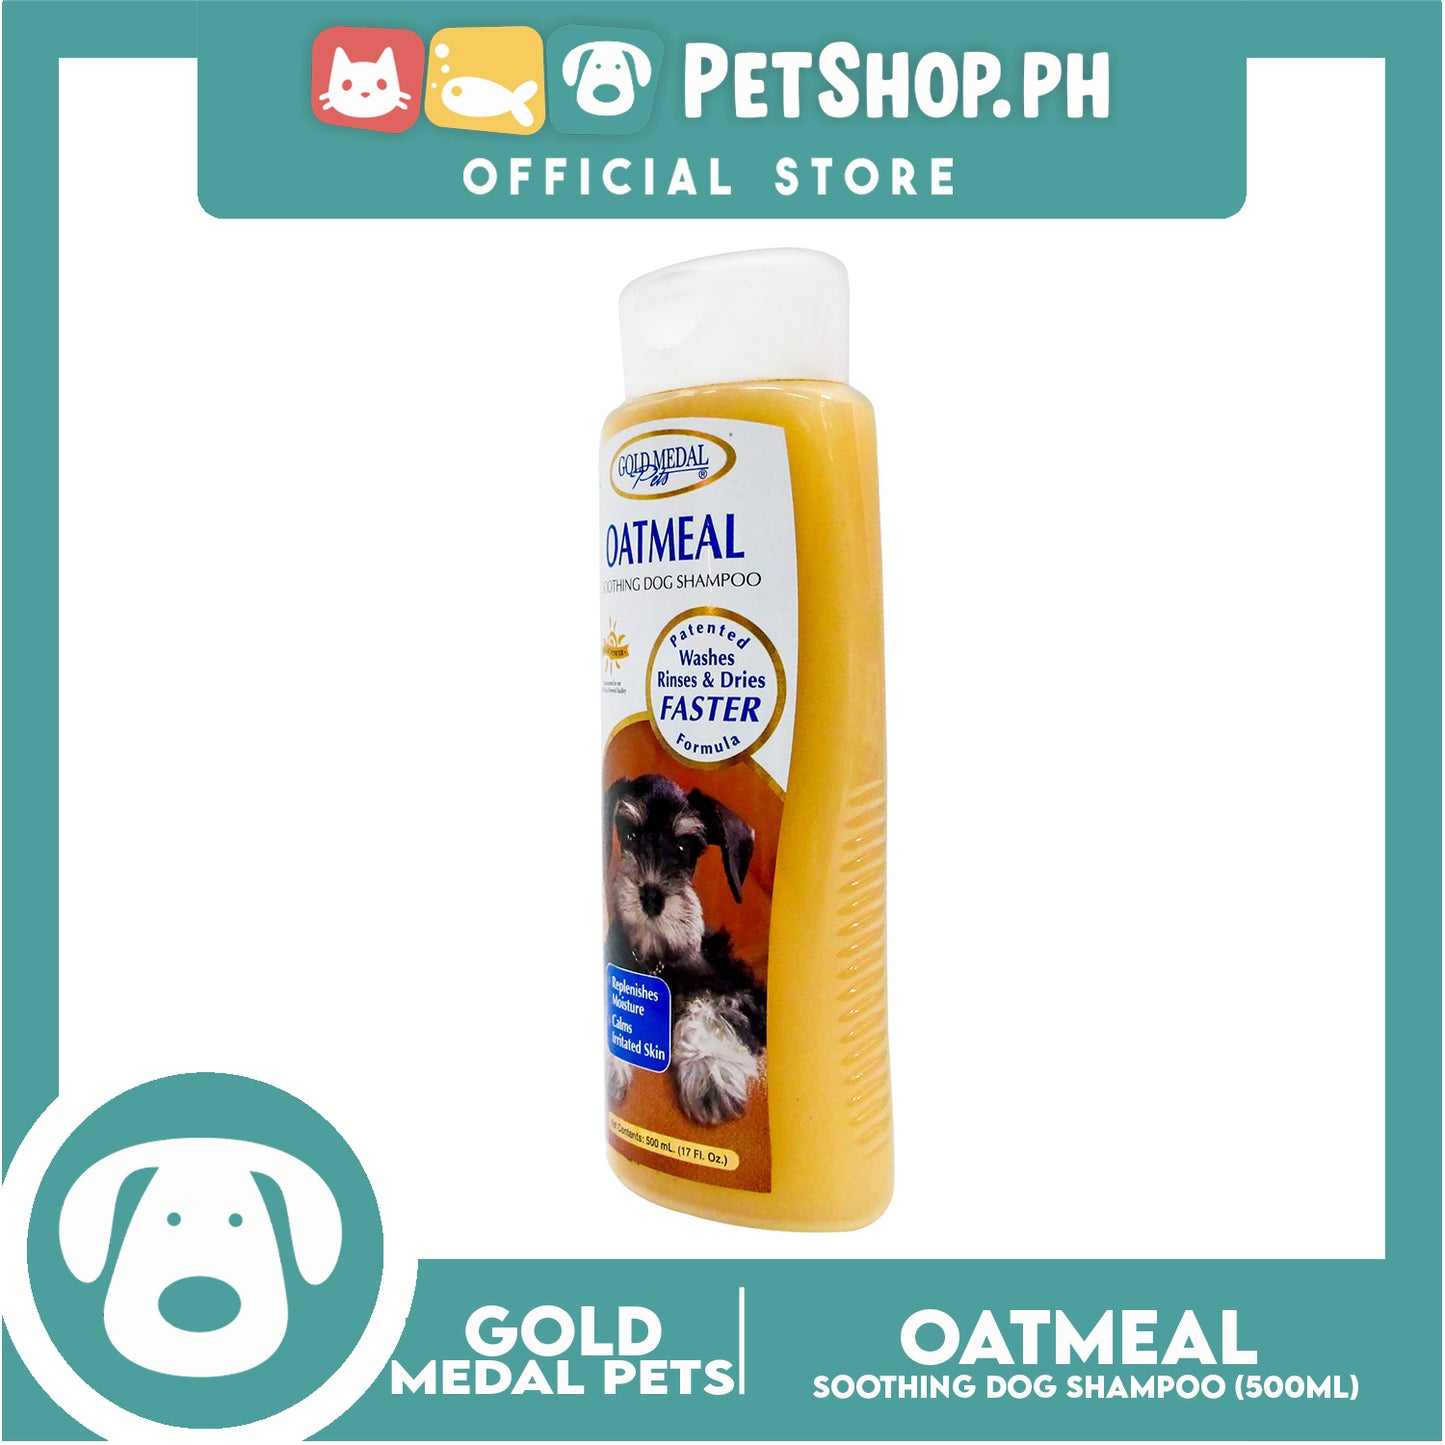 Gold Medal Pets Oatmeal Soothing Dog Shampoo 17oz Helps for Irritated Skin